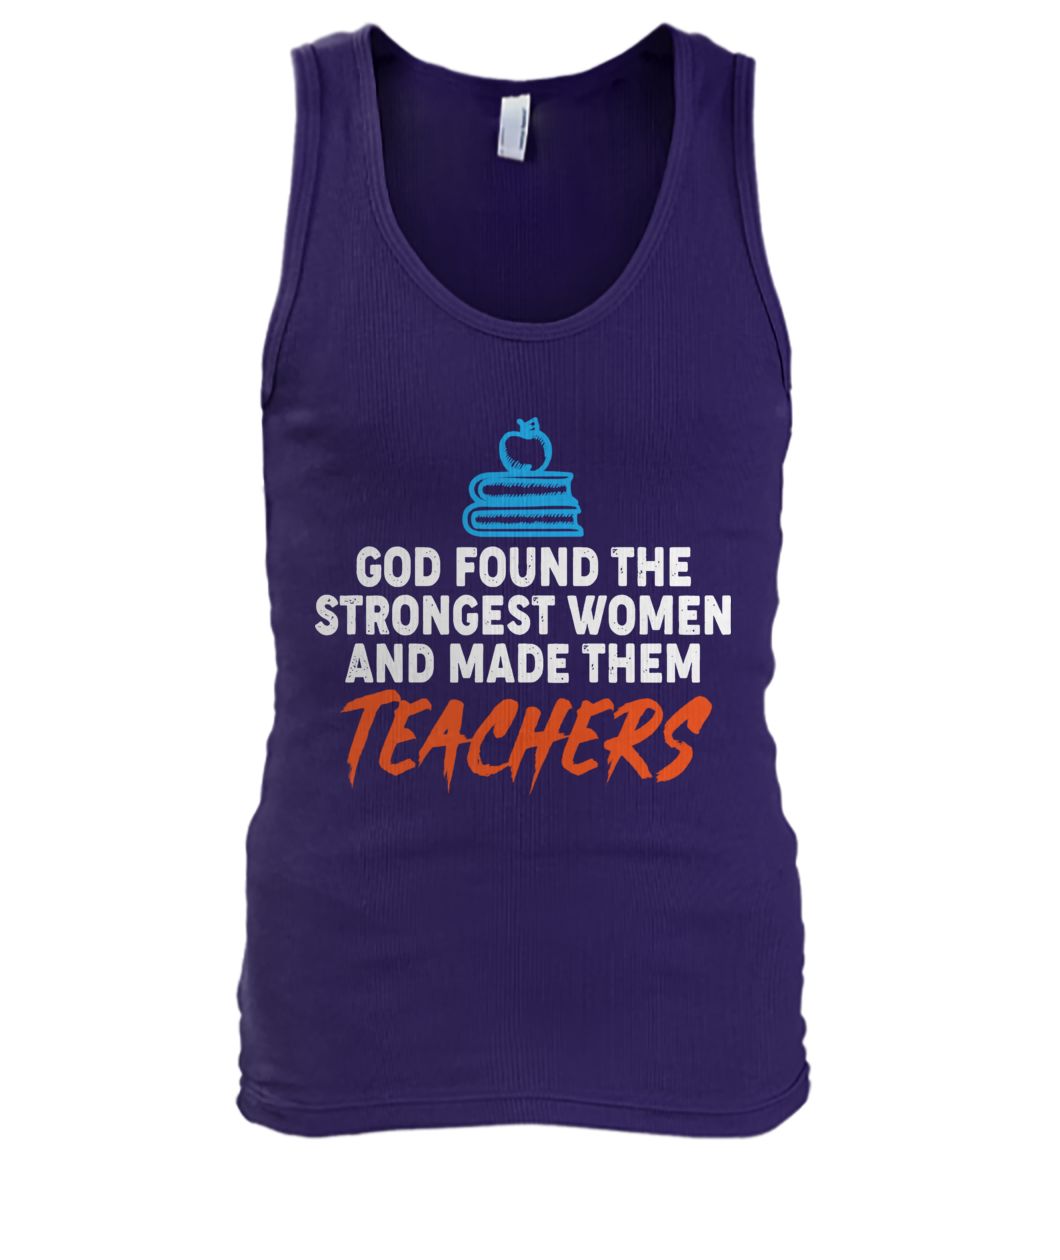 God found the strongest women and made them teachers men's tank top